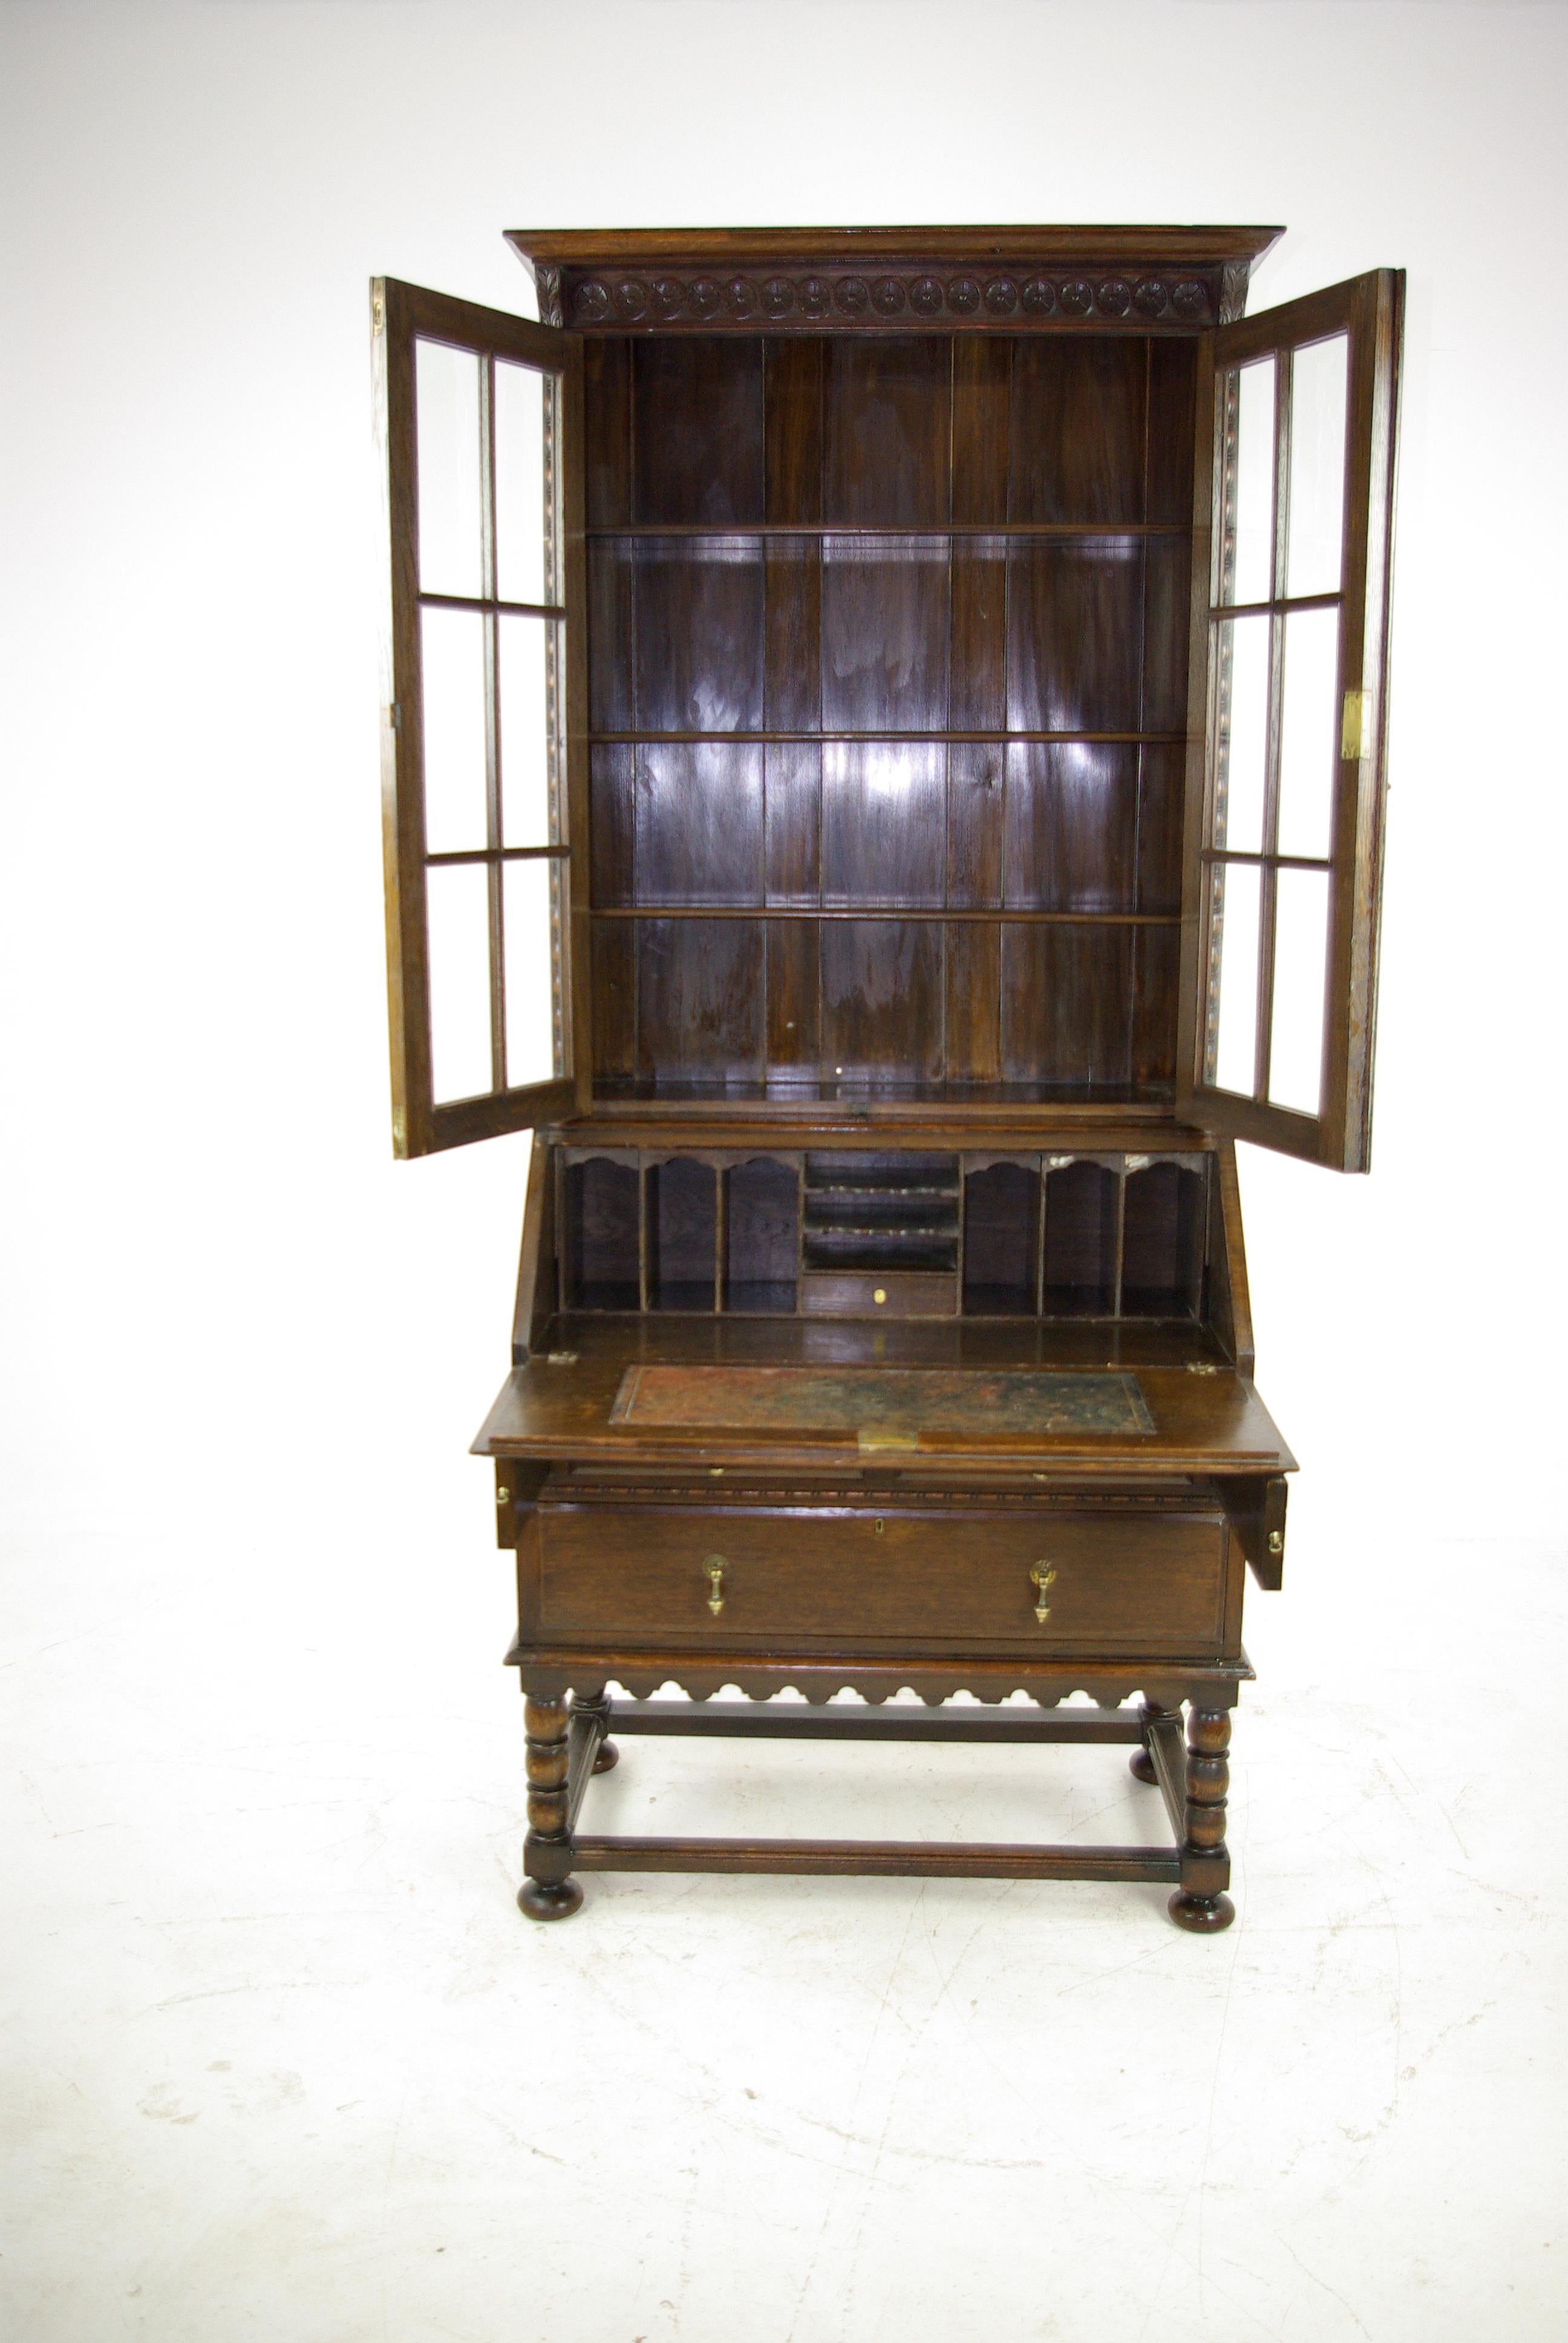 Secretary desk, antique fall front desk, oak bookcase, Scotland, 1920, antique furniture.

Scotland, 1920
Carved oak cornice with rosettes above
Upper section with two glass doors
Enclosed with three adjustable shelves
Lower section with drop